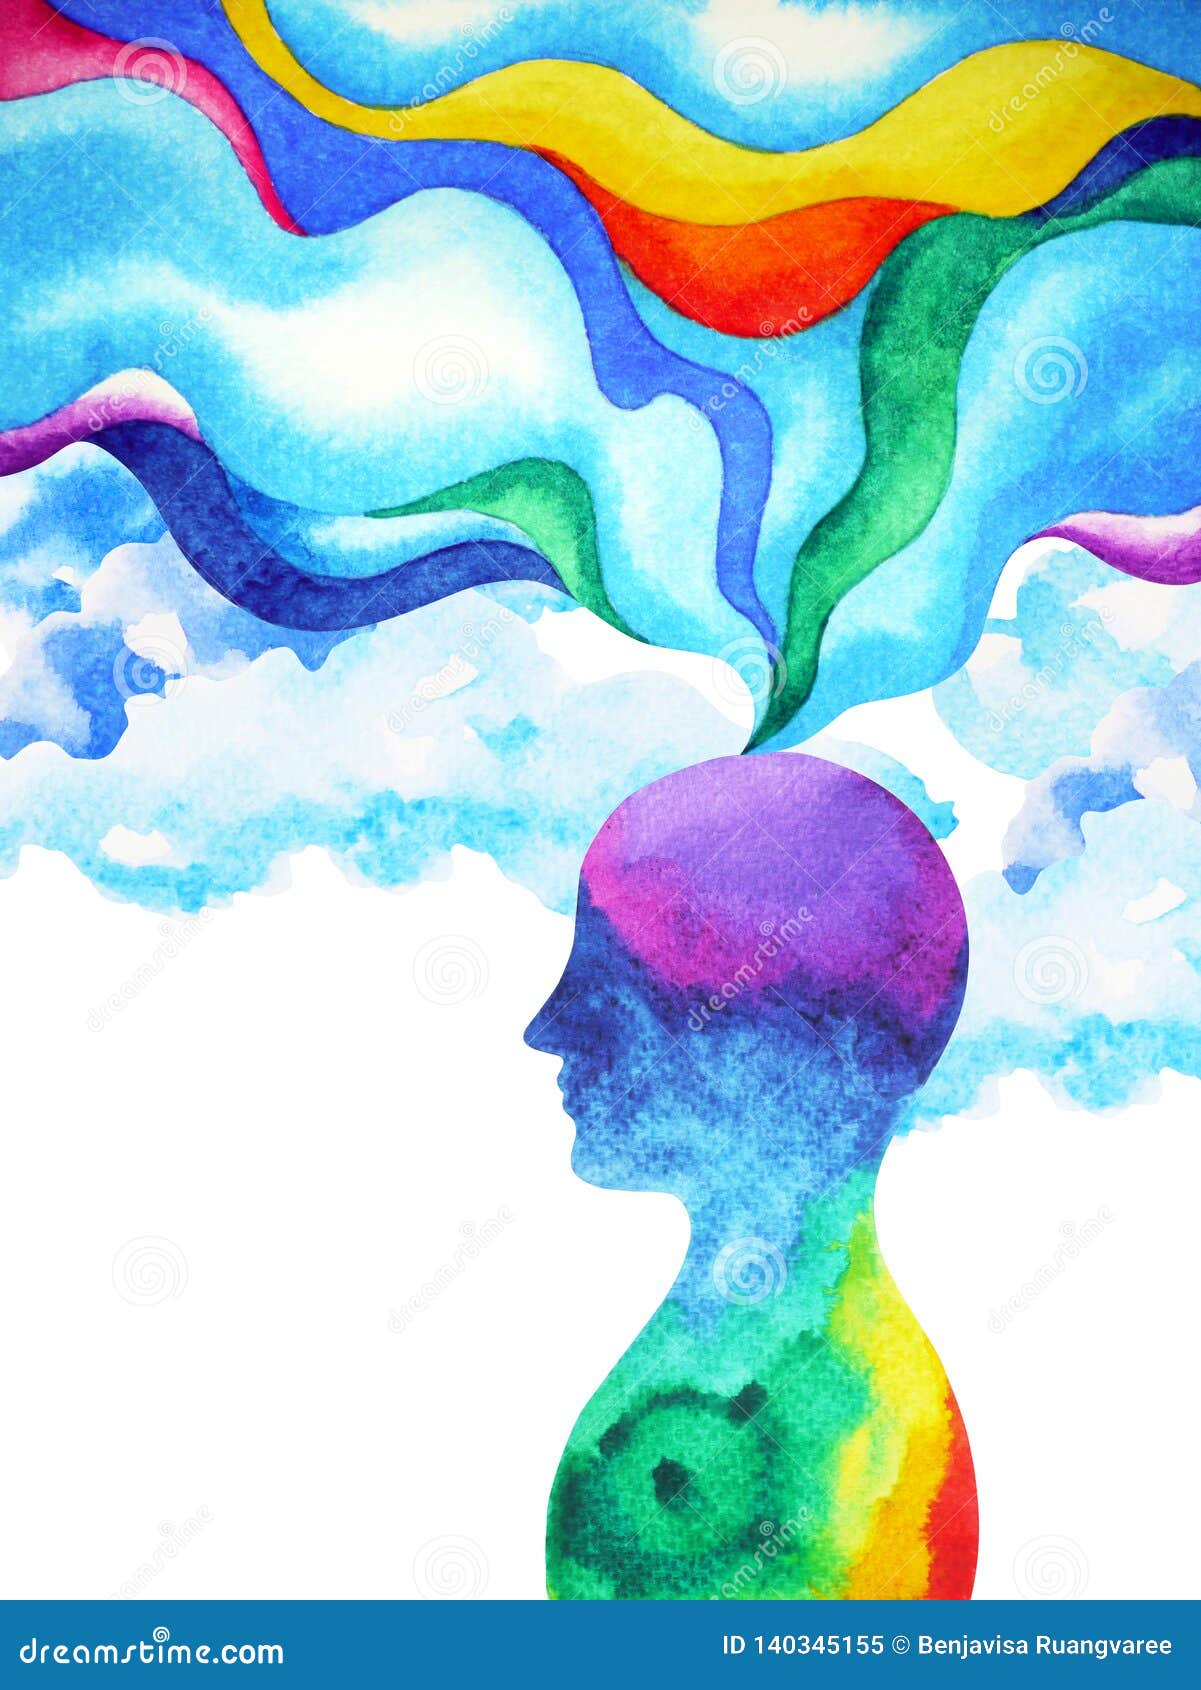 human head, chakra power, inspiration abstract thinking inside your mind, watercolor painting